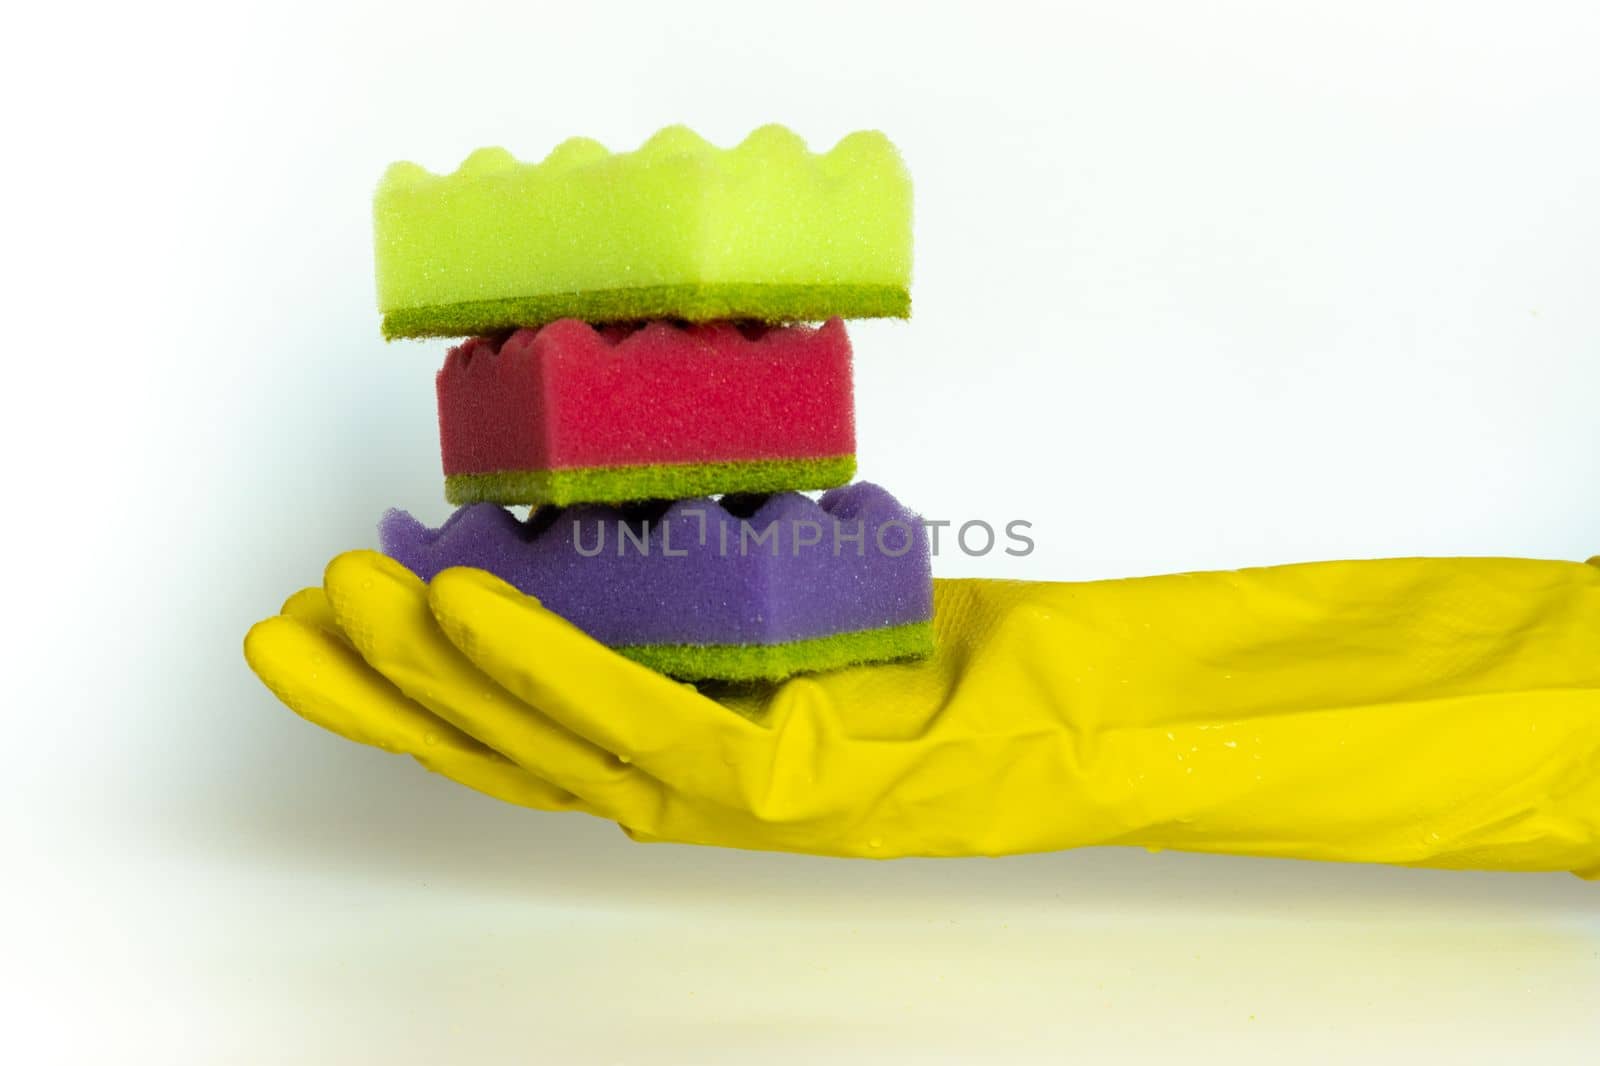 Stack of vivid multi-colored dish wash sponges in woman hand in protective glove. Household cleaning scrub pad. Home cleaning concept. Space for text.